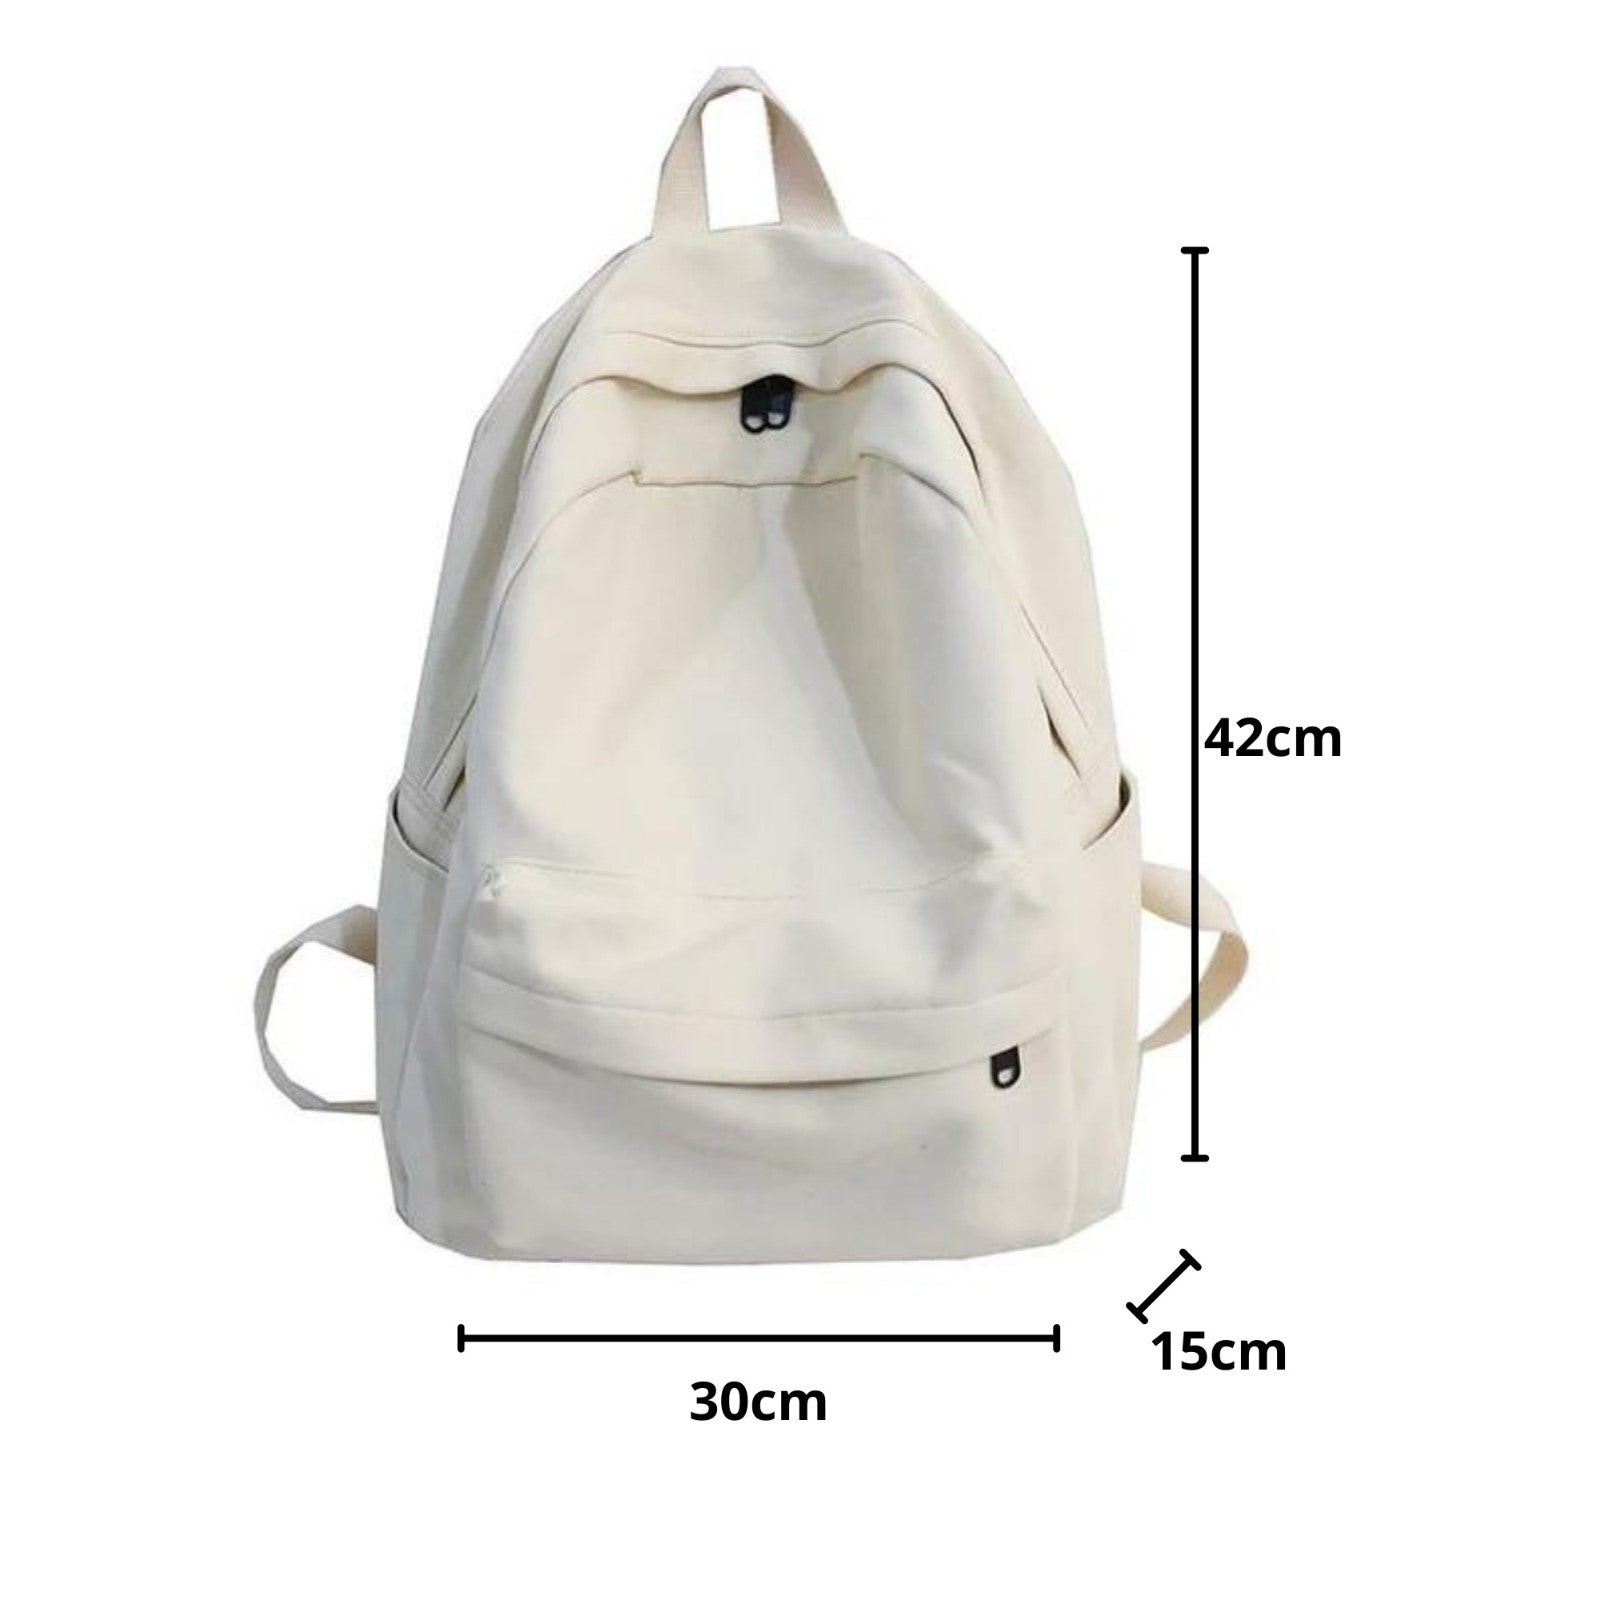 The Basic Canvas School Backpack - More than a backpack